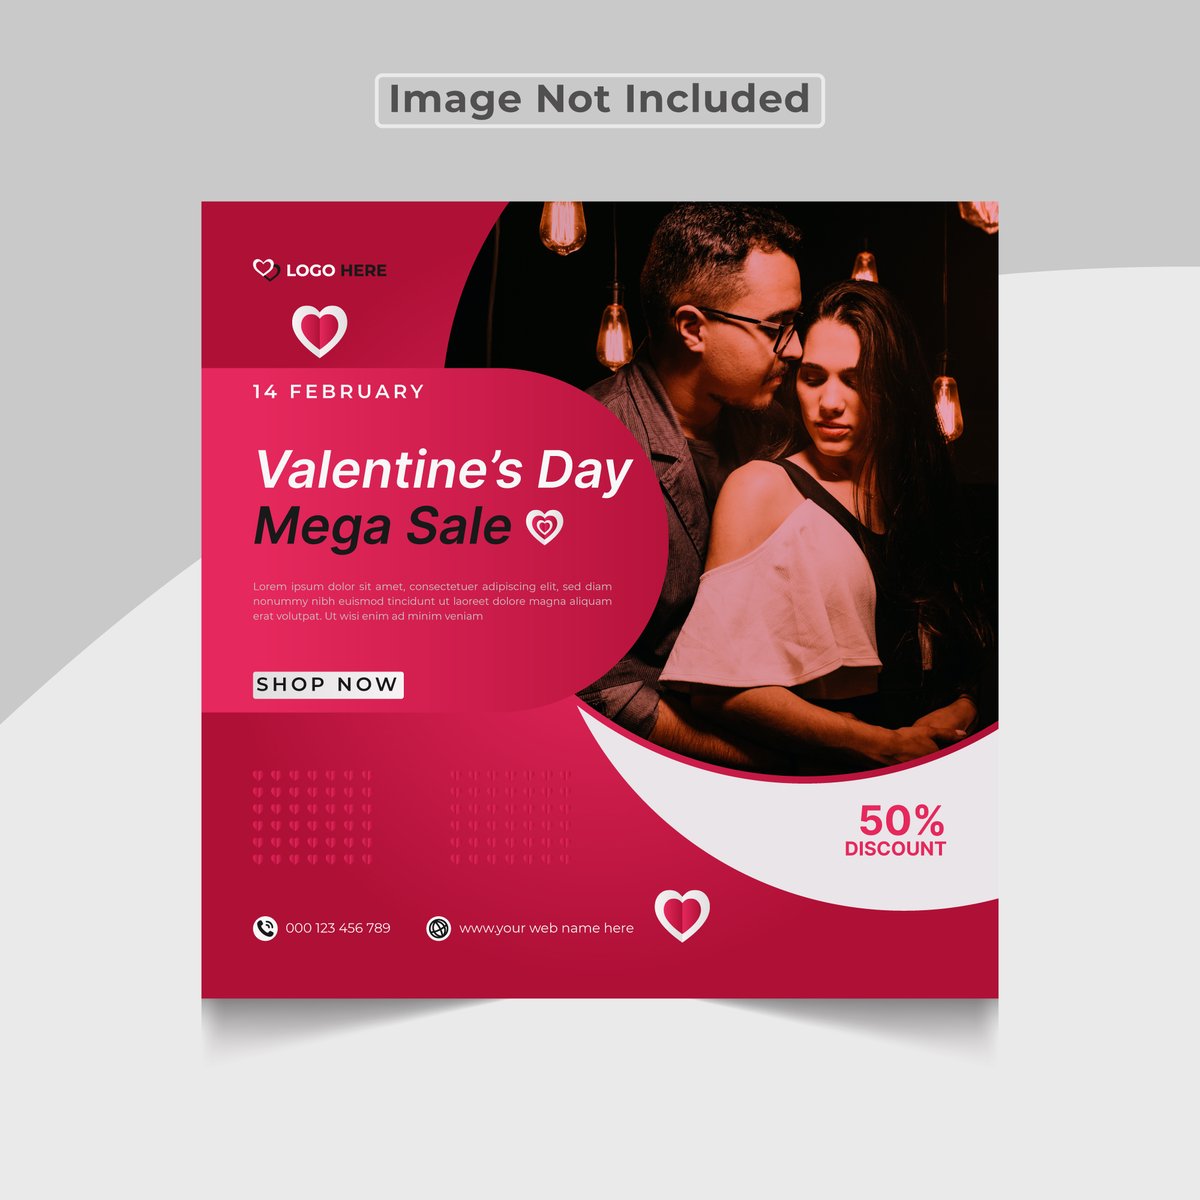 Happy valentine day promotional discount sale social media post

#socialmedia #post #attractive  #business  #valentinesday #megasale #specialdiscount #sale #shopping  #valentinesday2023 #love #couple #valentinesdaygift #banneradvertising #valentine #eventdesign #Template